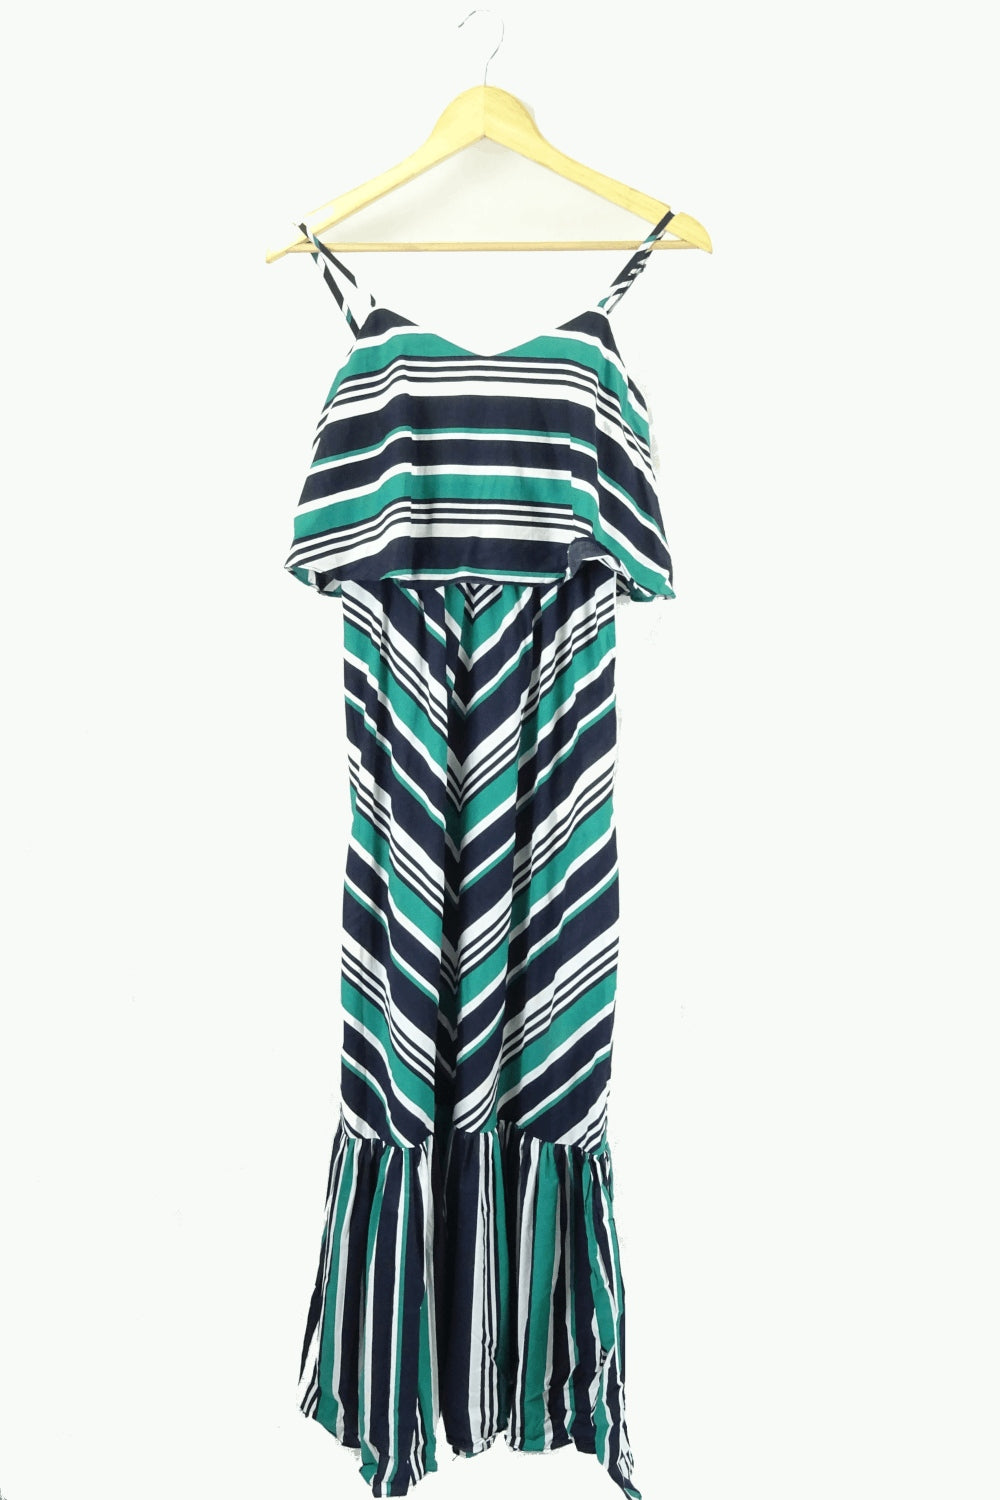 Piper Striped Green and Black Dress 6